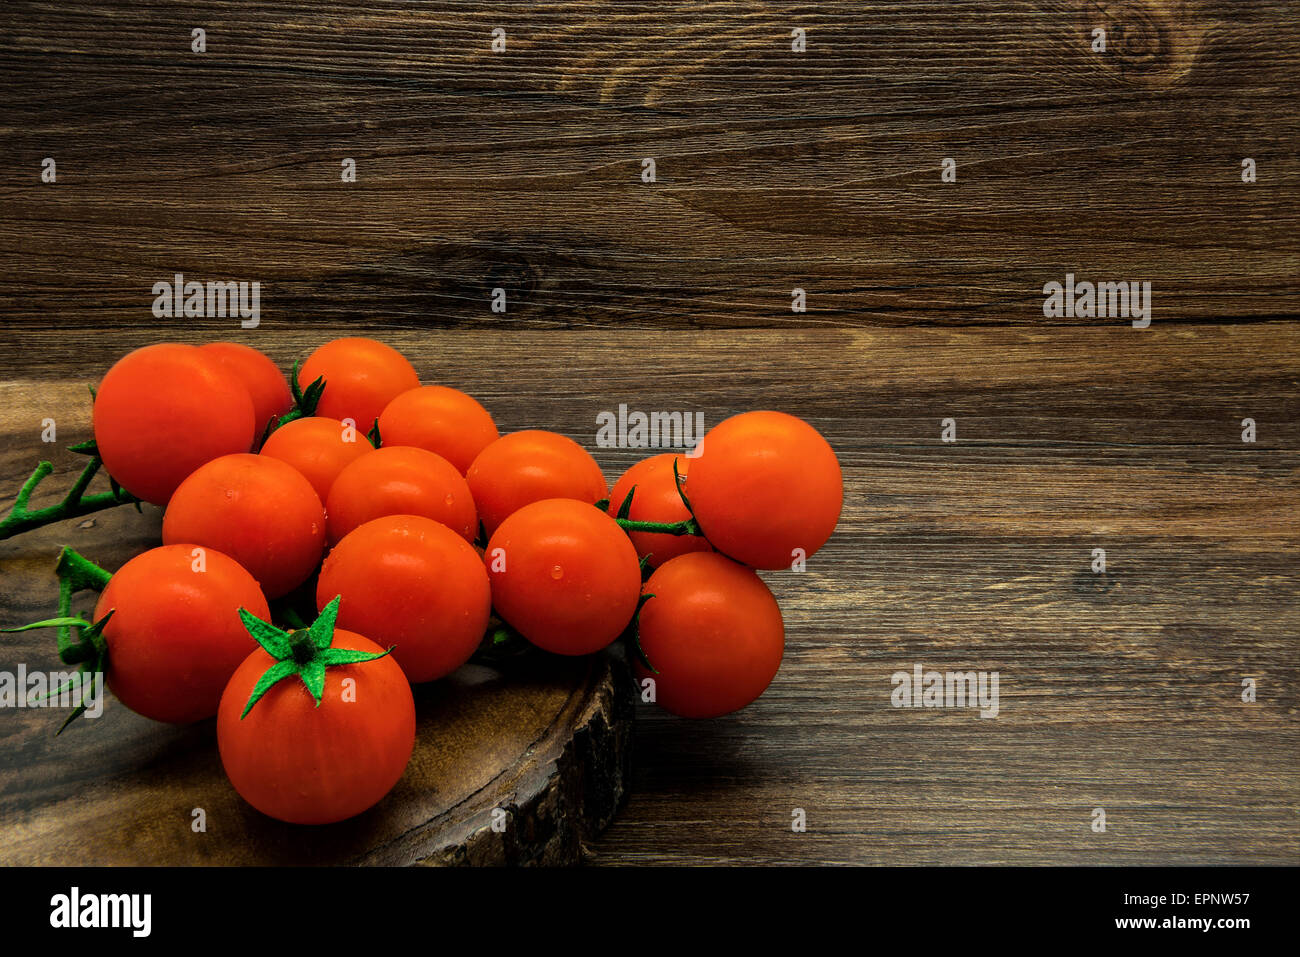 Cherry tomatoes on a wooden rustic background. Stock Photo